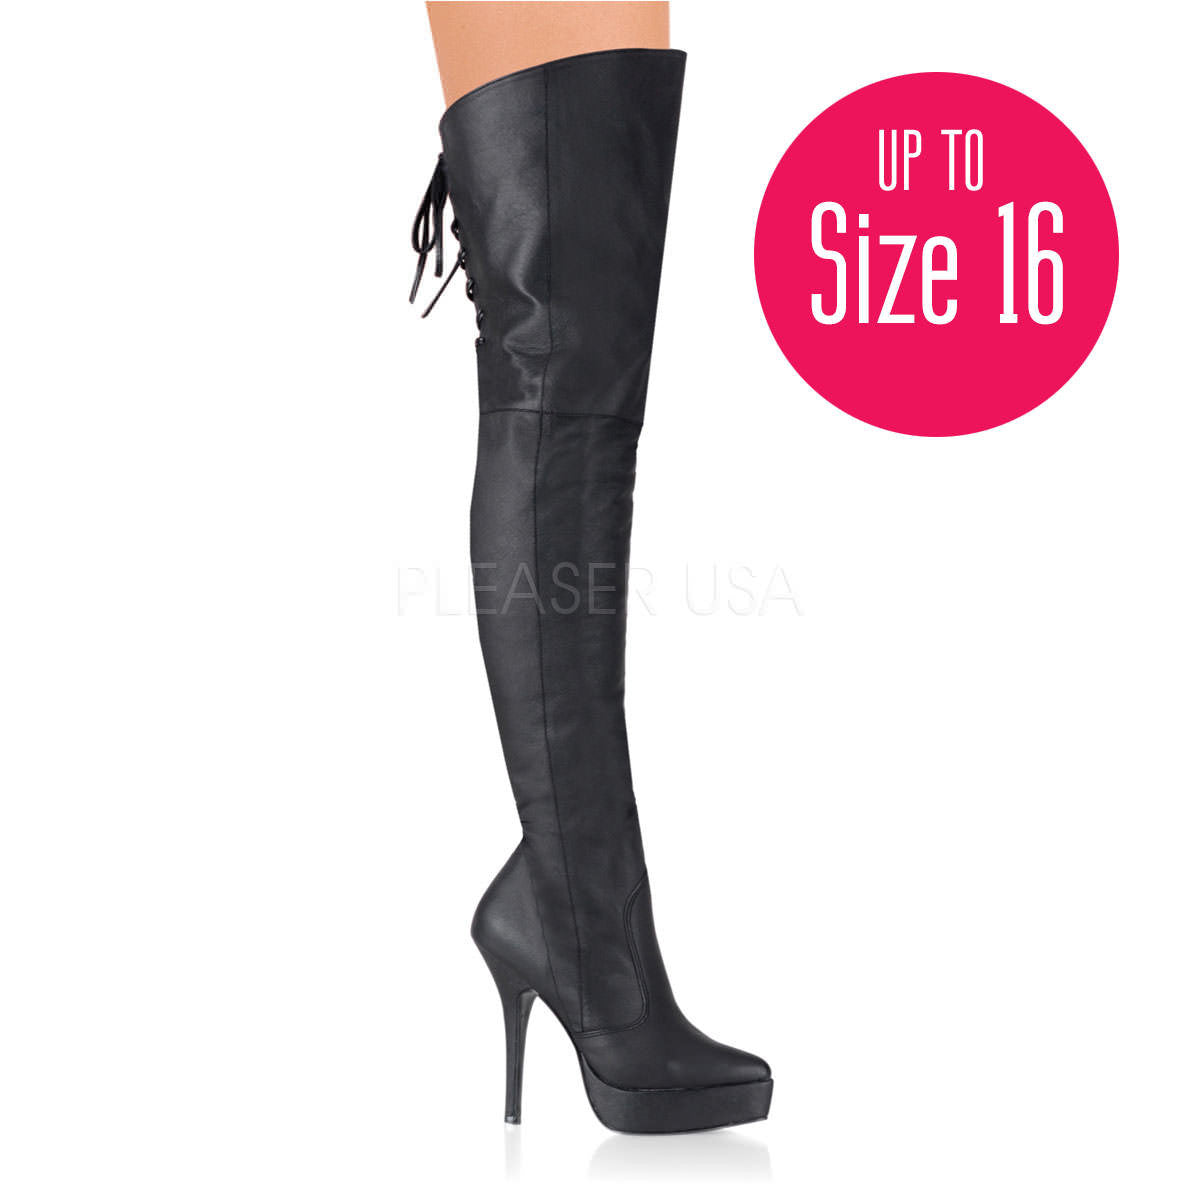 Devious,DEVIOUS INDULGE-3011 Black Leather Thigh High Boots - Shoecup.com